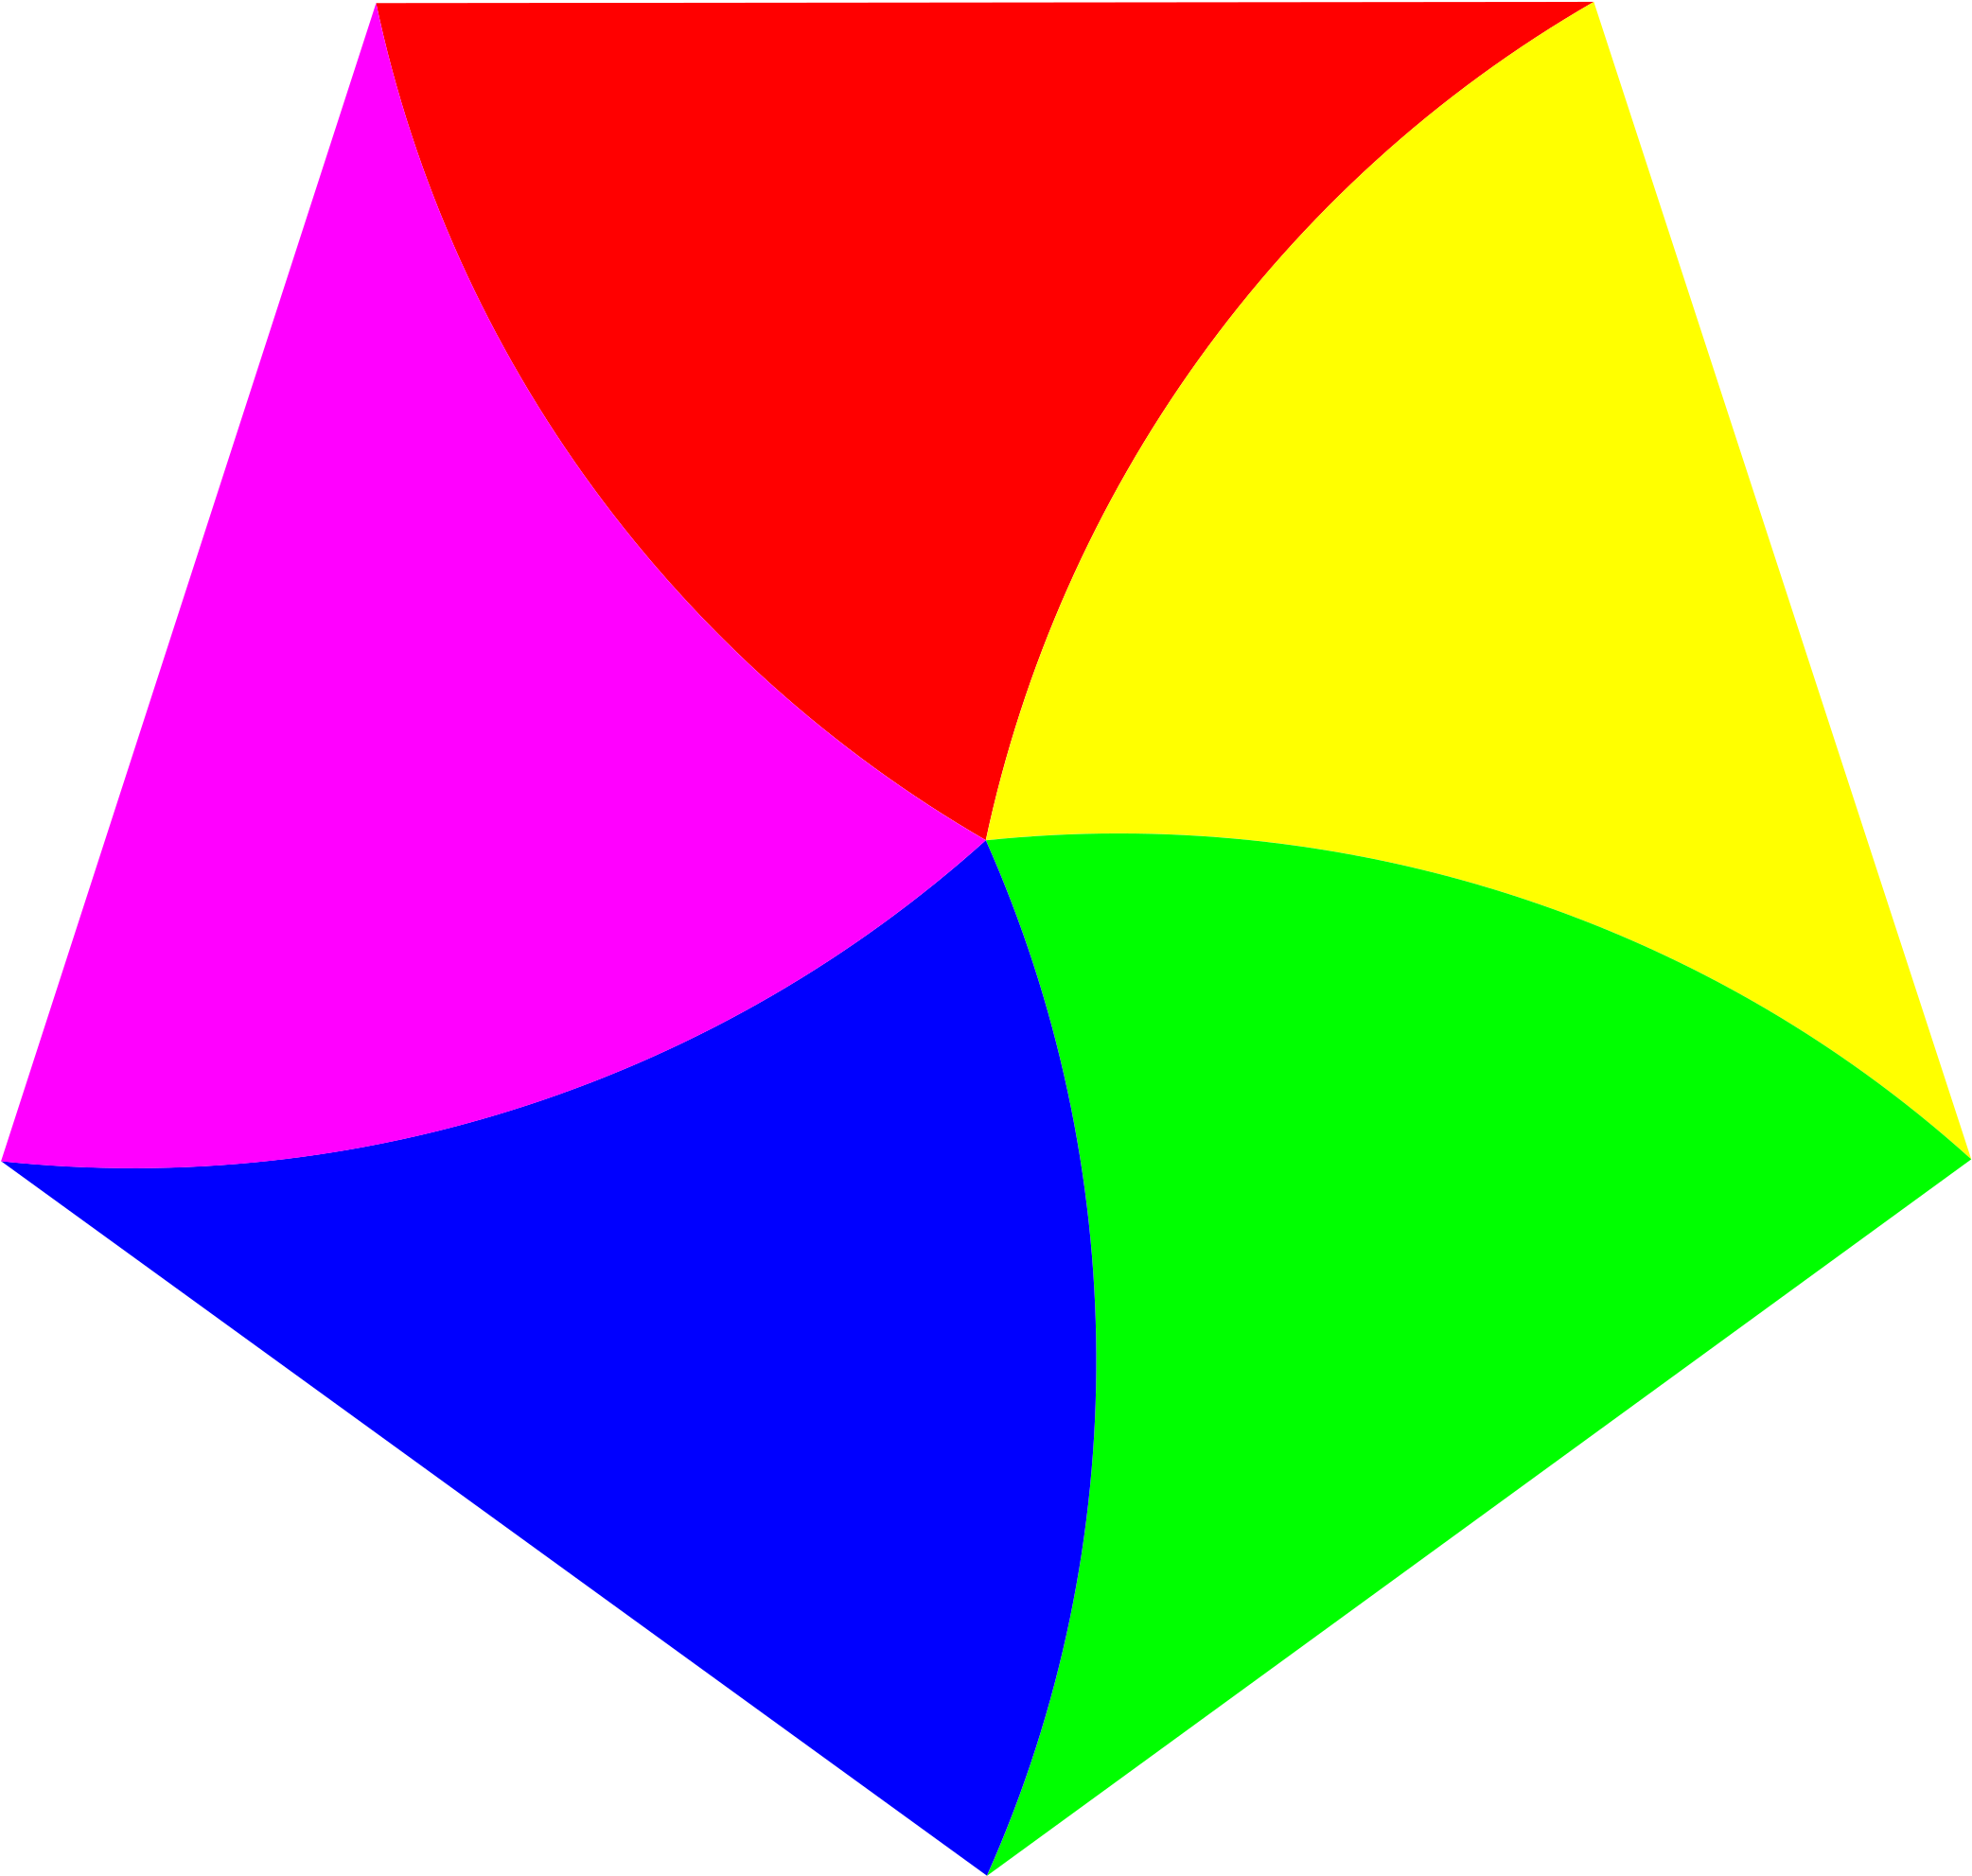 A Colorful Hexagon With Black Background